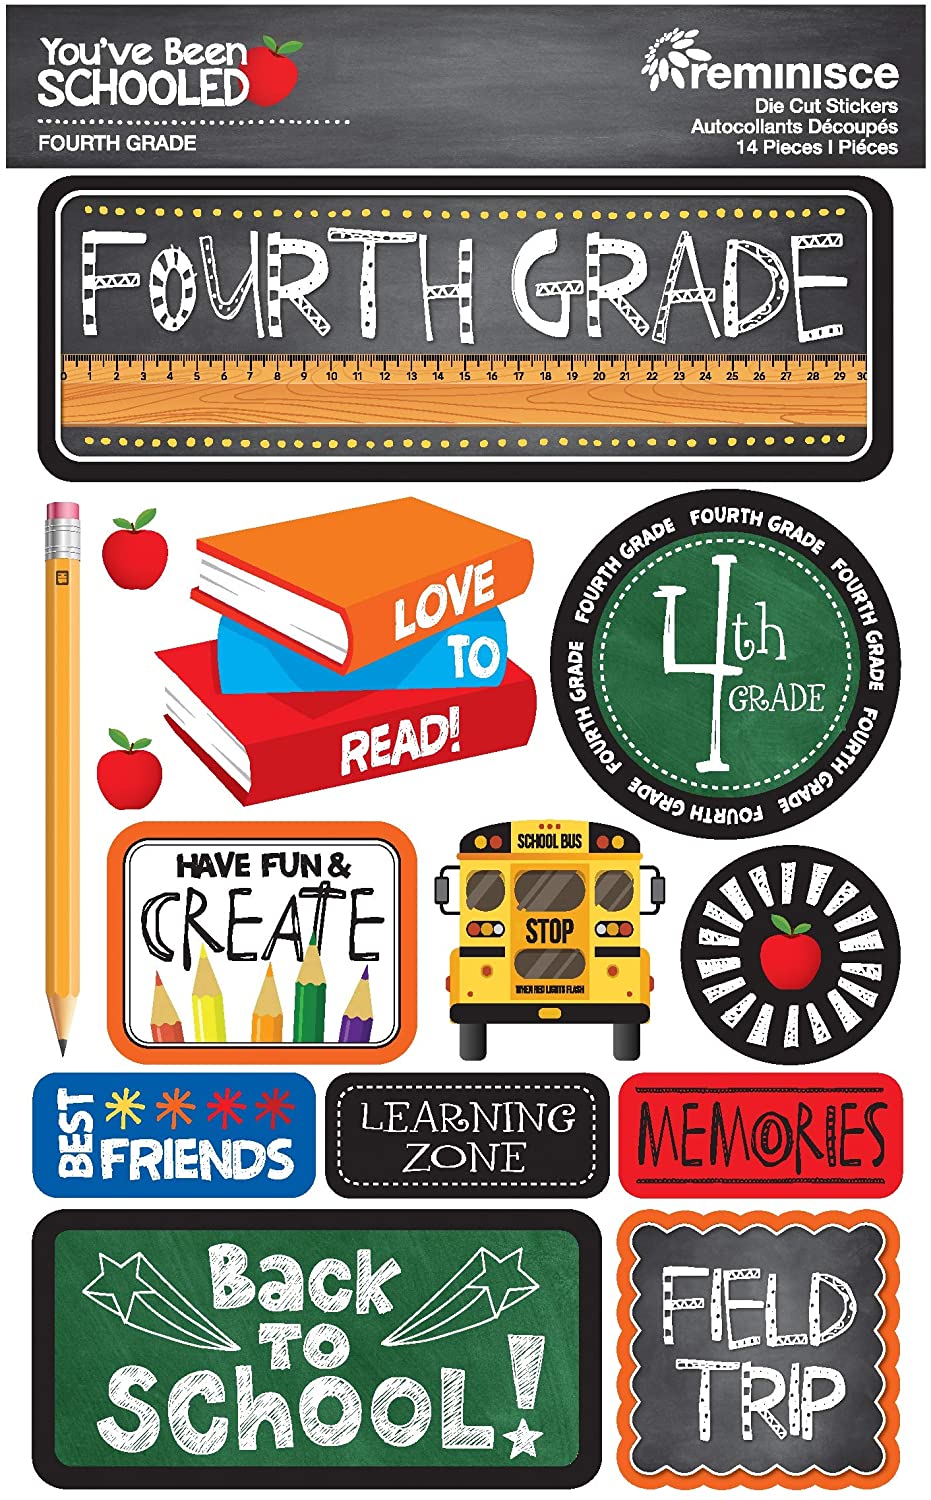 You've Been Schooled 4th Fourth Grade School Stickers